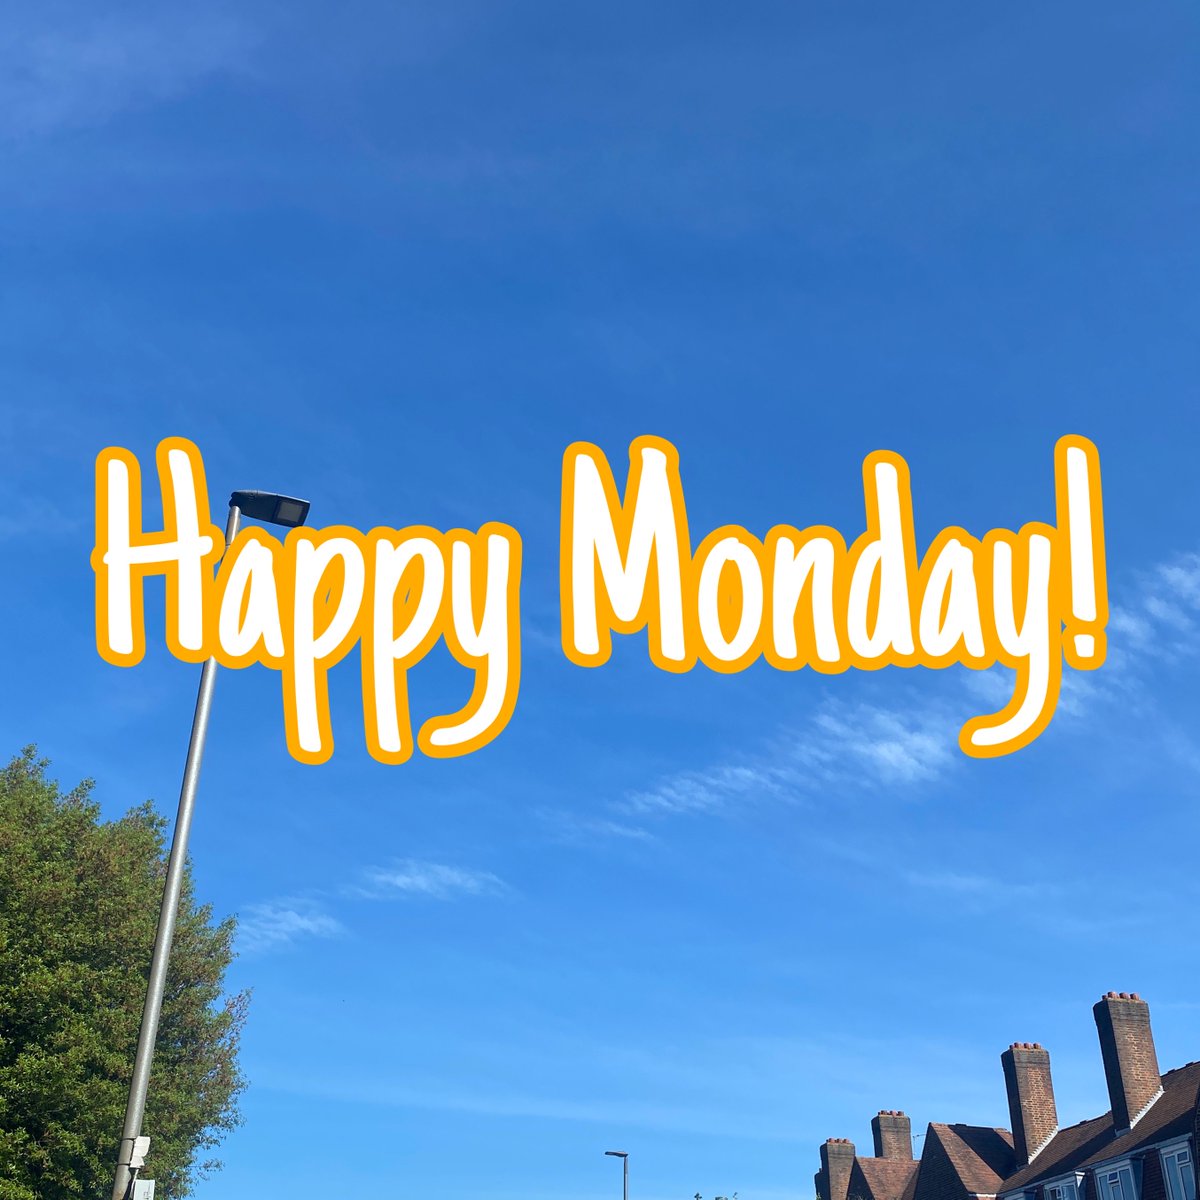 Monday Musings - In a world where you can be anything, be kind!
capitadiscovery.co.uk/wandsworth/ite…
 #mondaymusings #earlsfieldmusings #earlsfieldlibrary #wellbeing #talkwandsworth